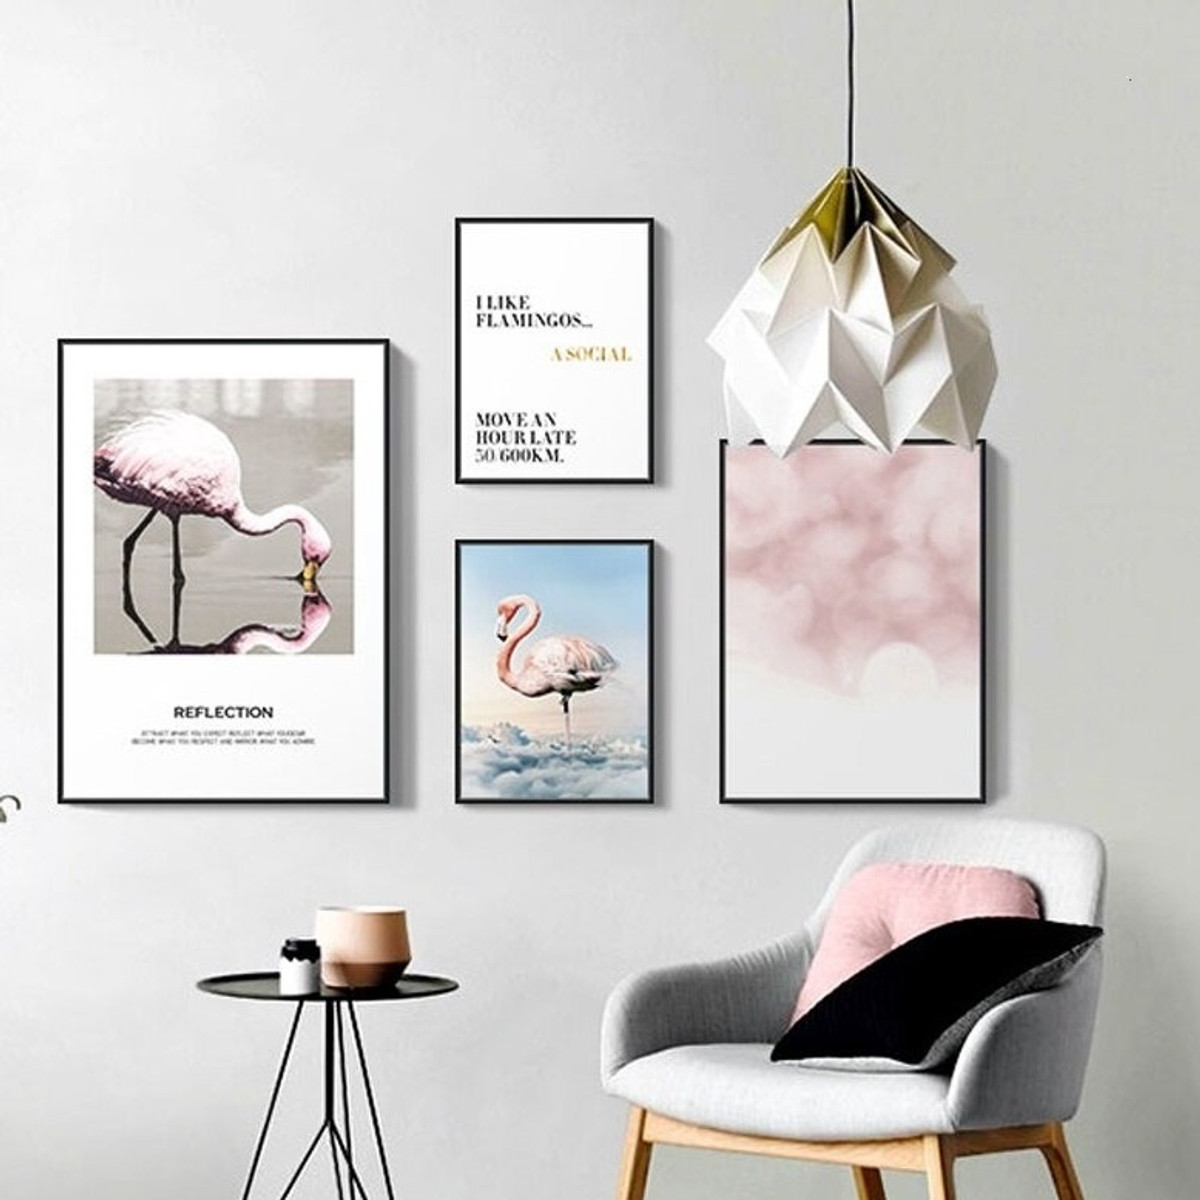 I Like Flamingos Nordic Cheap 4 Multi Panel Bird Wall Art Photograph Quotes Canvas Print for Room Assortment